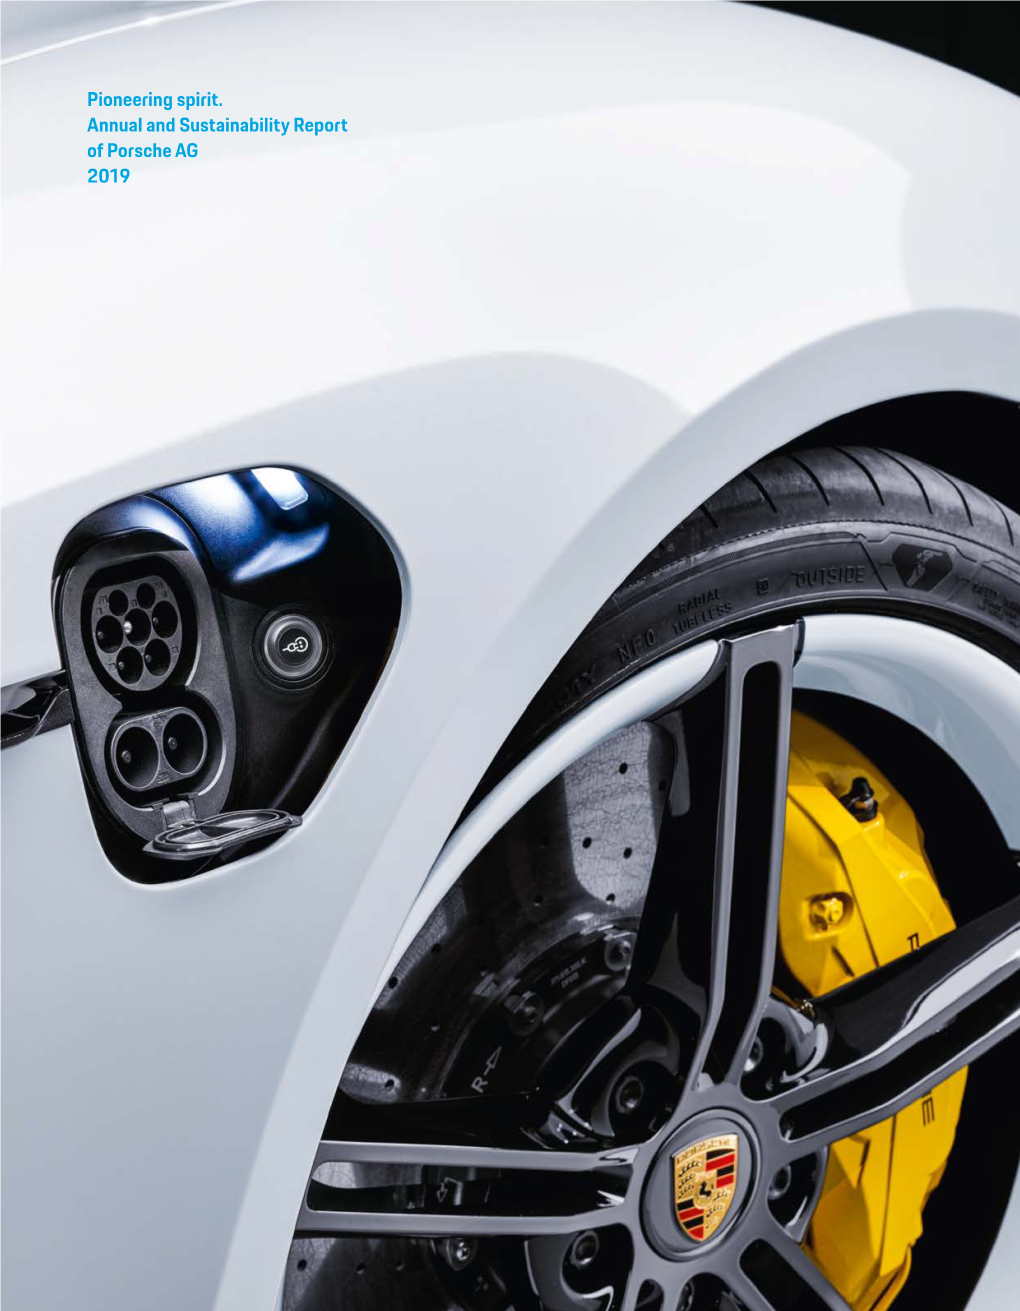 Annual and Sustainability Report 2019 of Porsche AG